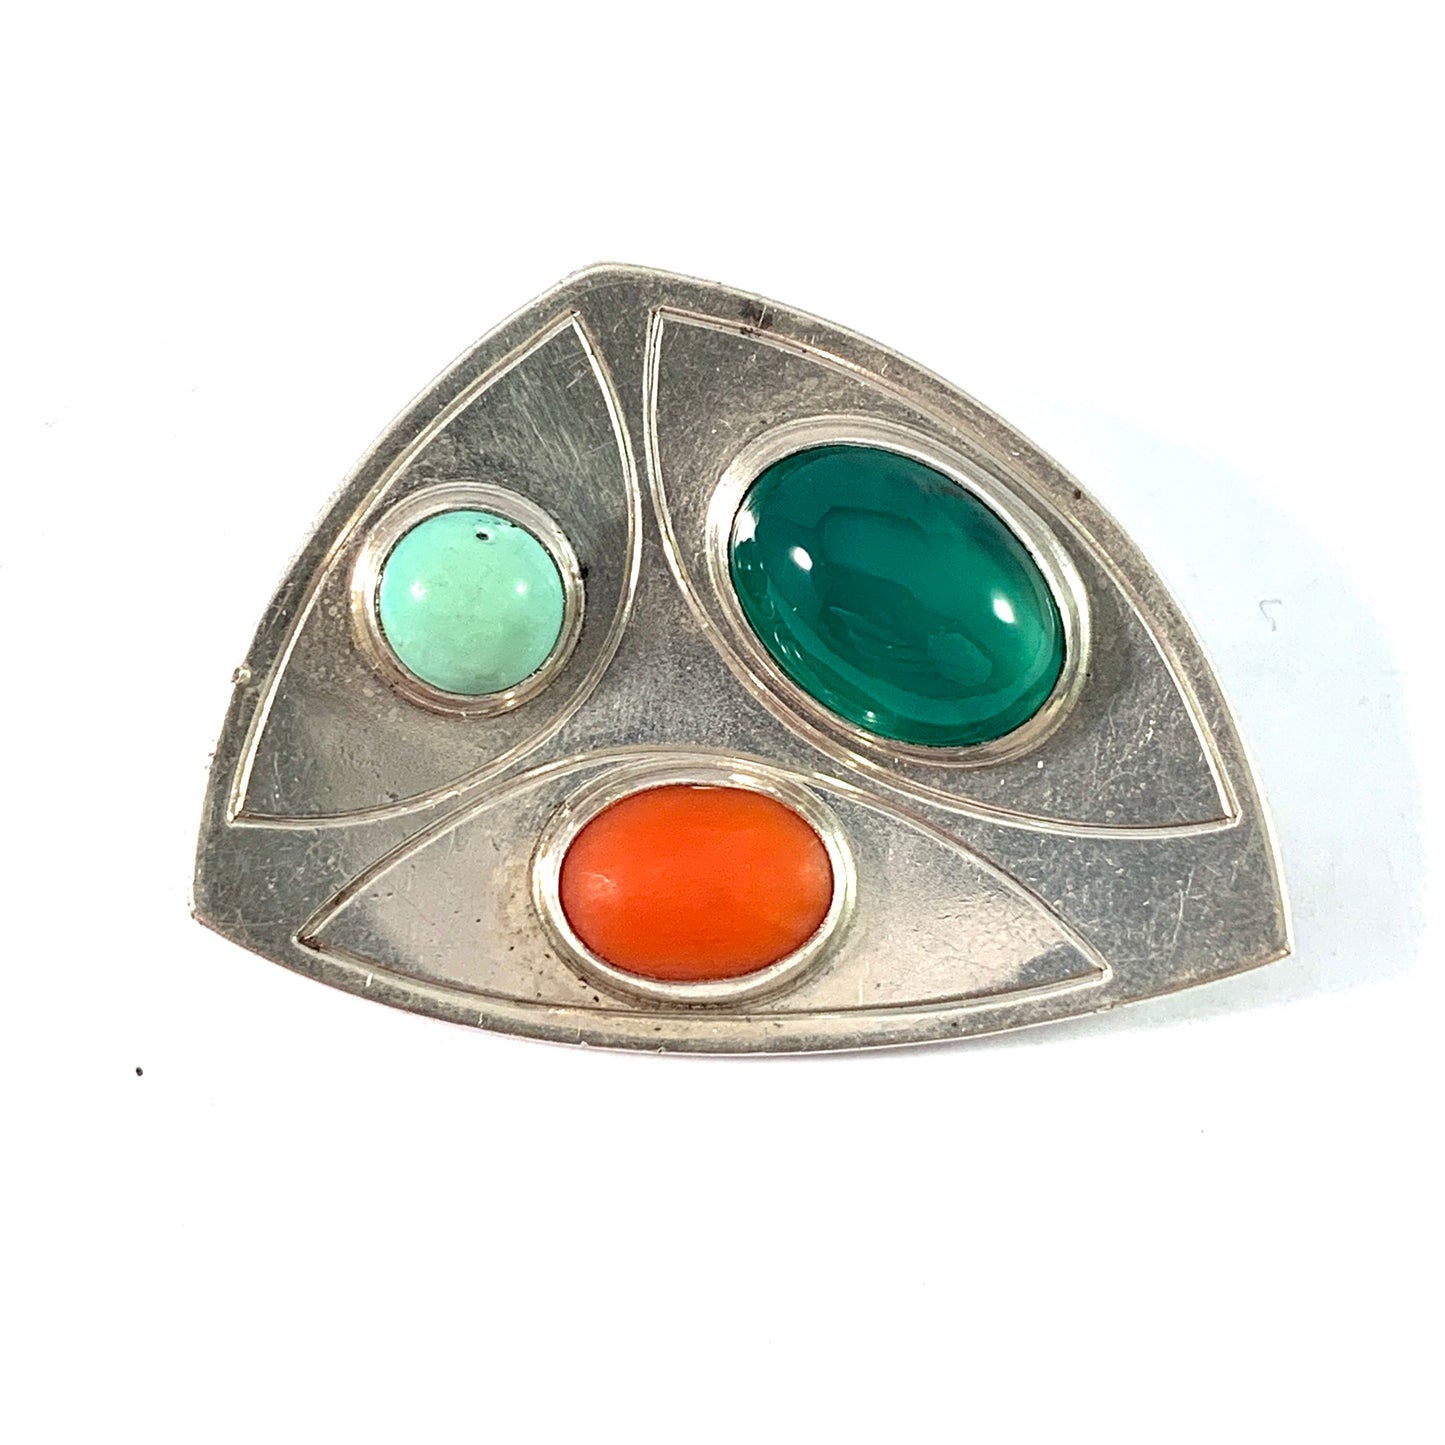 Michelsen, Stockholm 1957. Mid Century Modern Sterling Silver Chrysoprase Turquoise Coral Brooch.